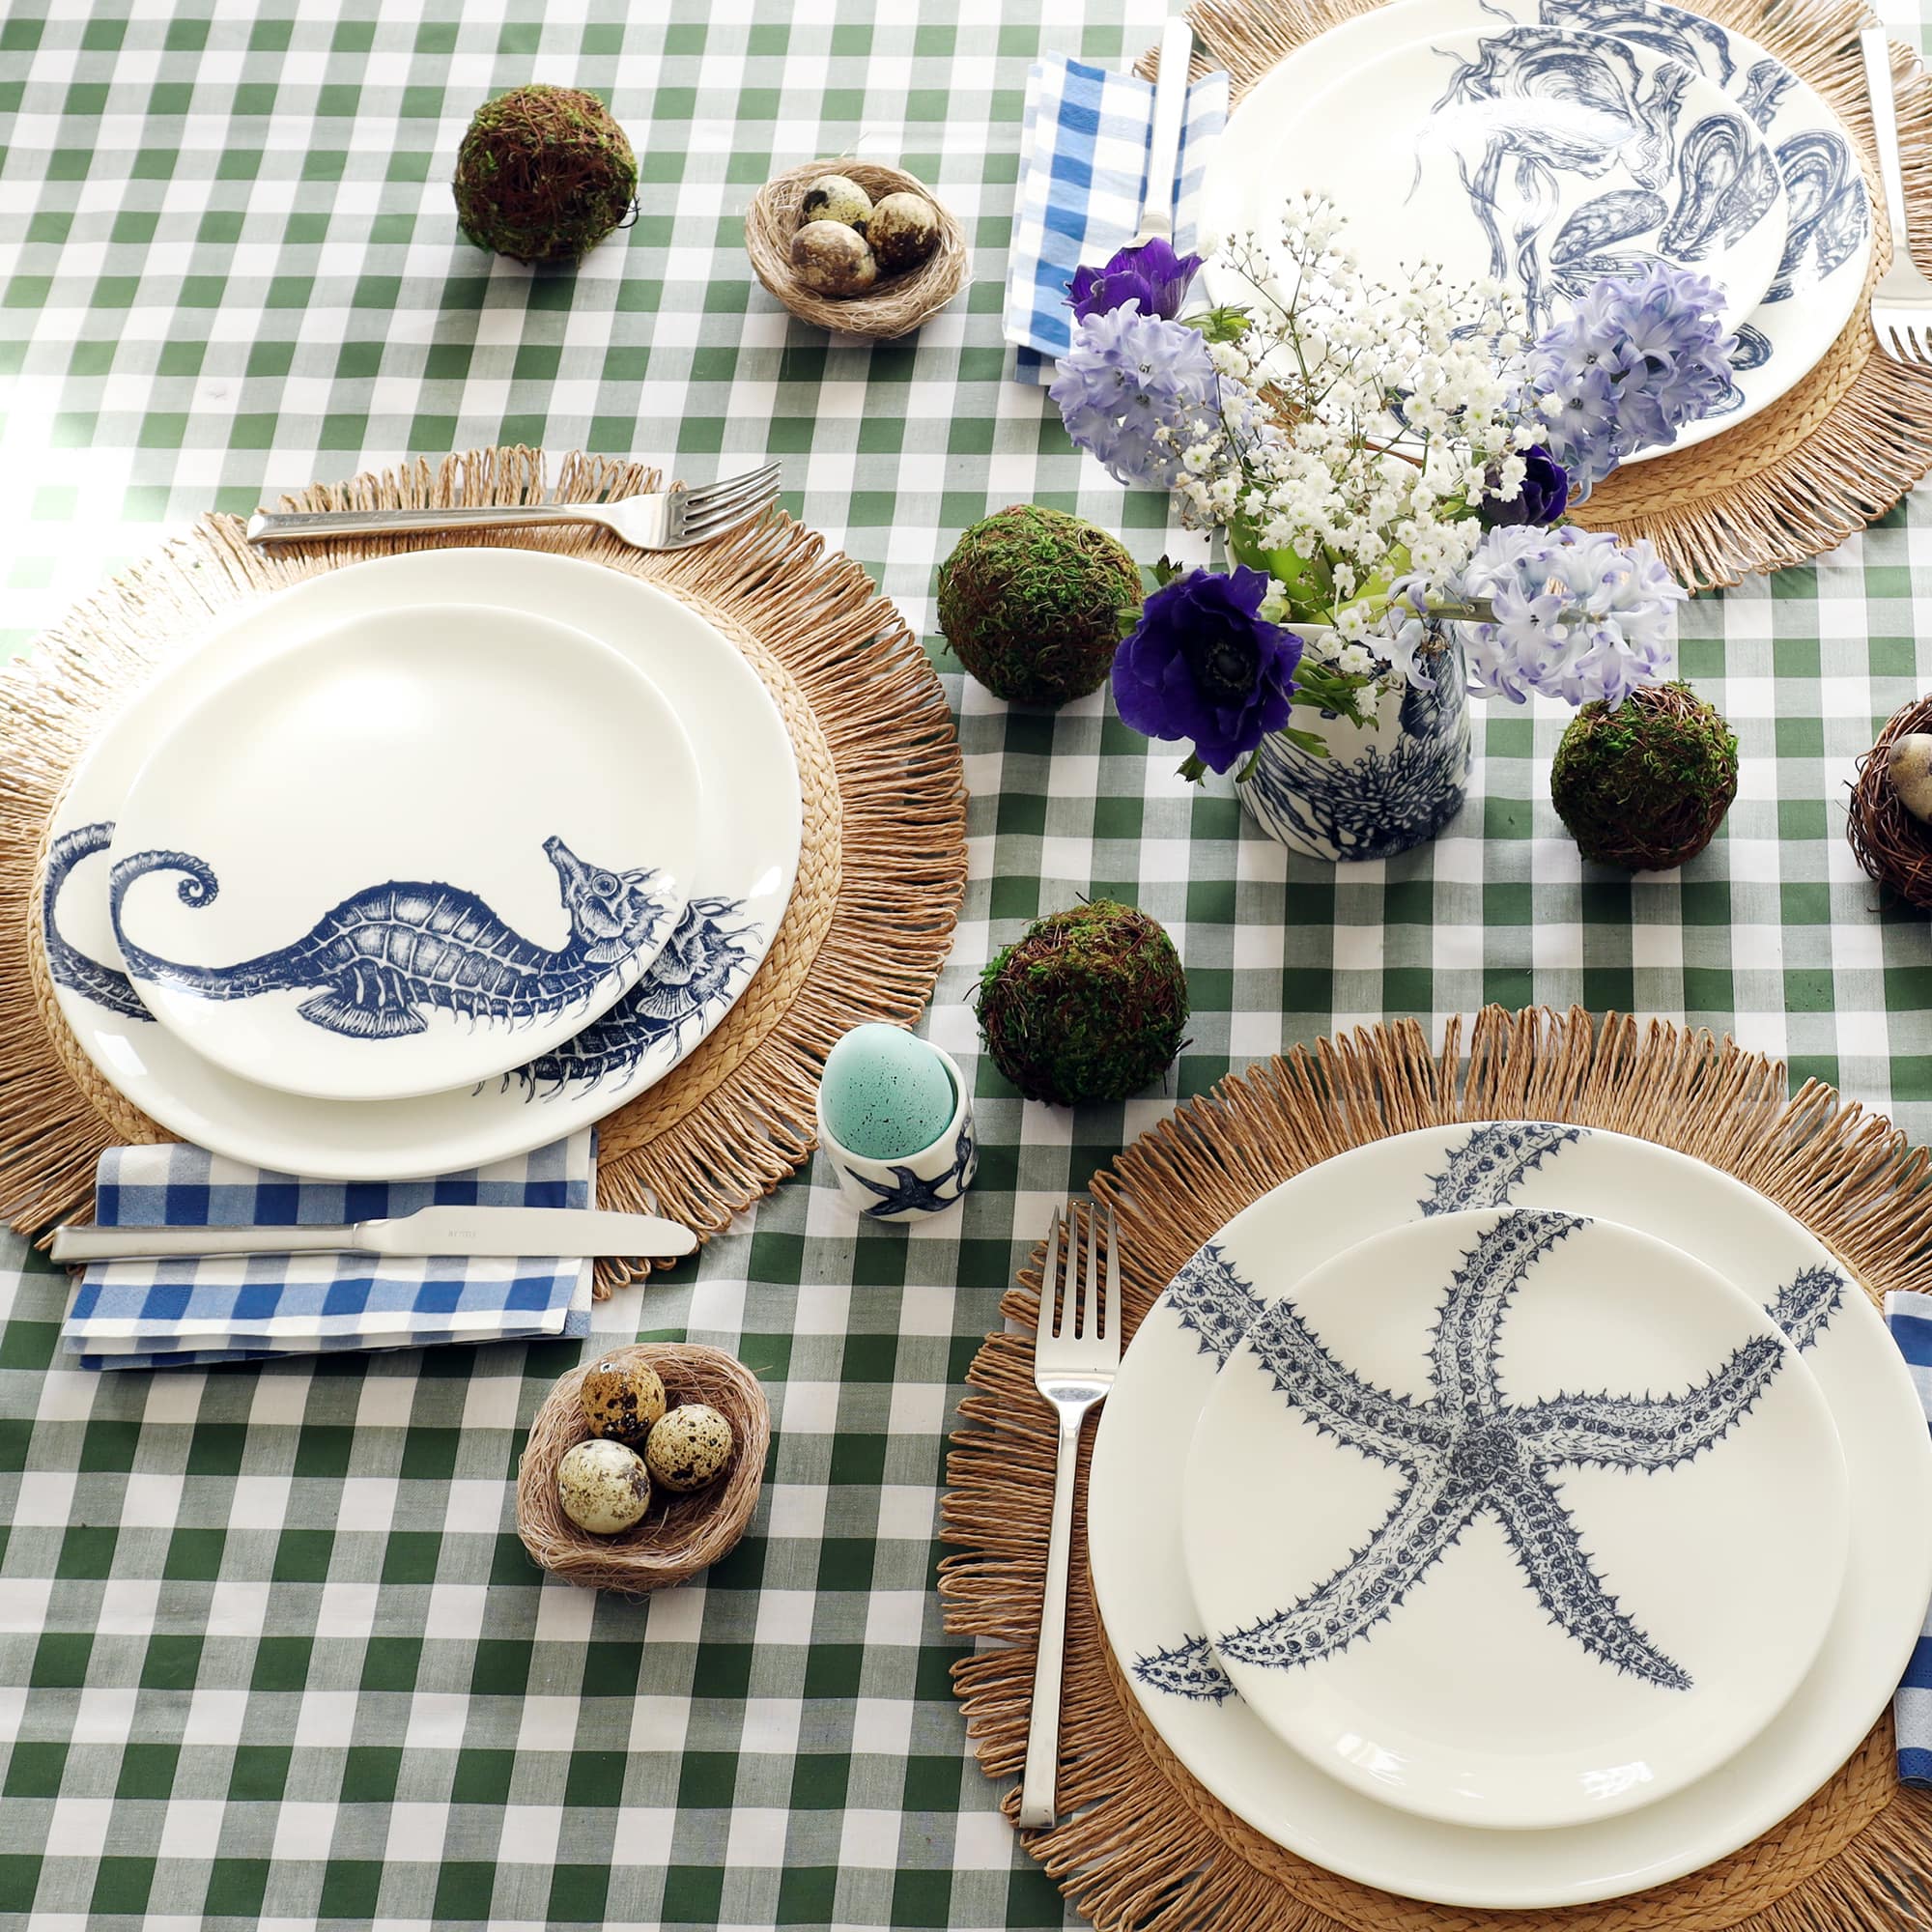 White bone china dinner plate with side plate sitting on top. Bothe plate have a navy blue illustration of a starfish on. They are set as a place setting on a raffia placemat with blue gingham napkin and green gingham tablecloth. the table is set for Easter with eggs in egg cups and moss balls.